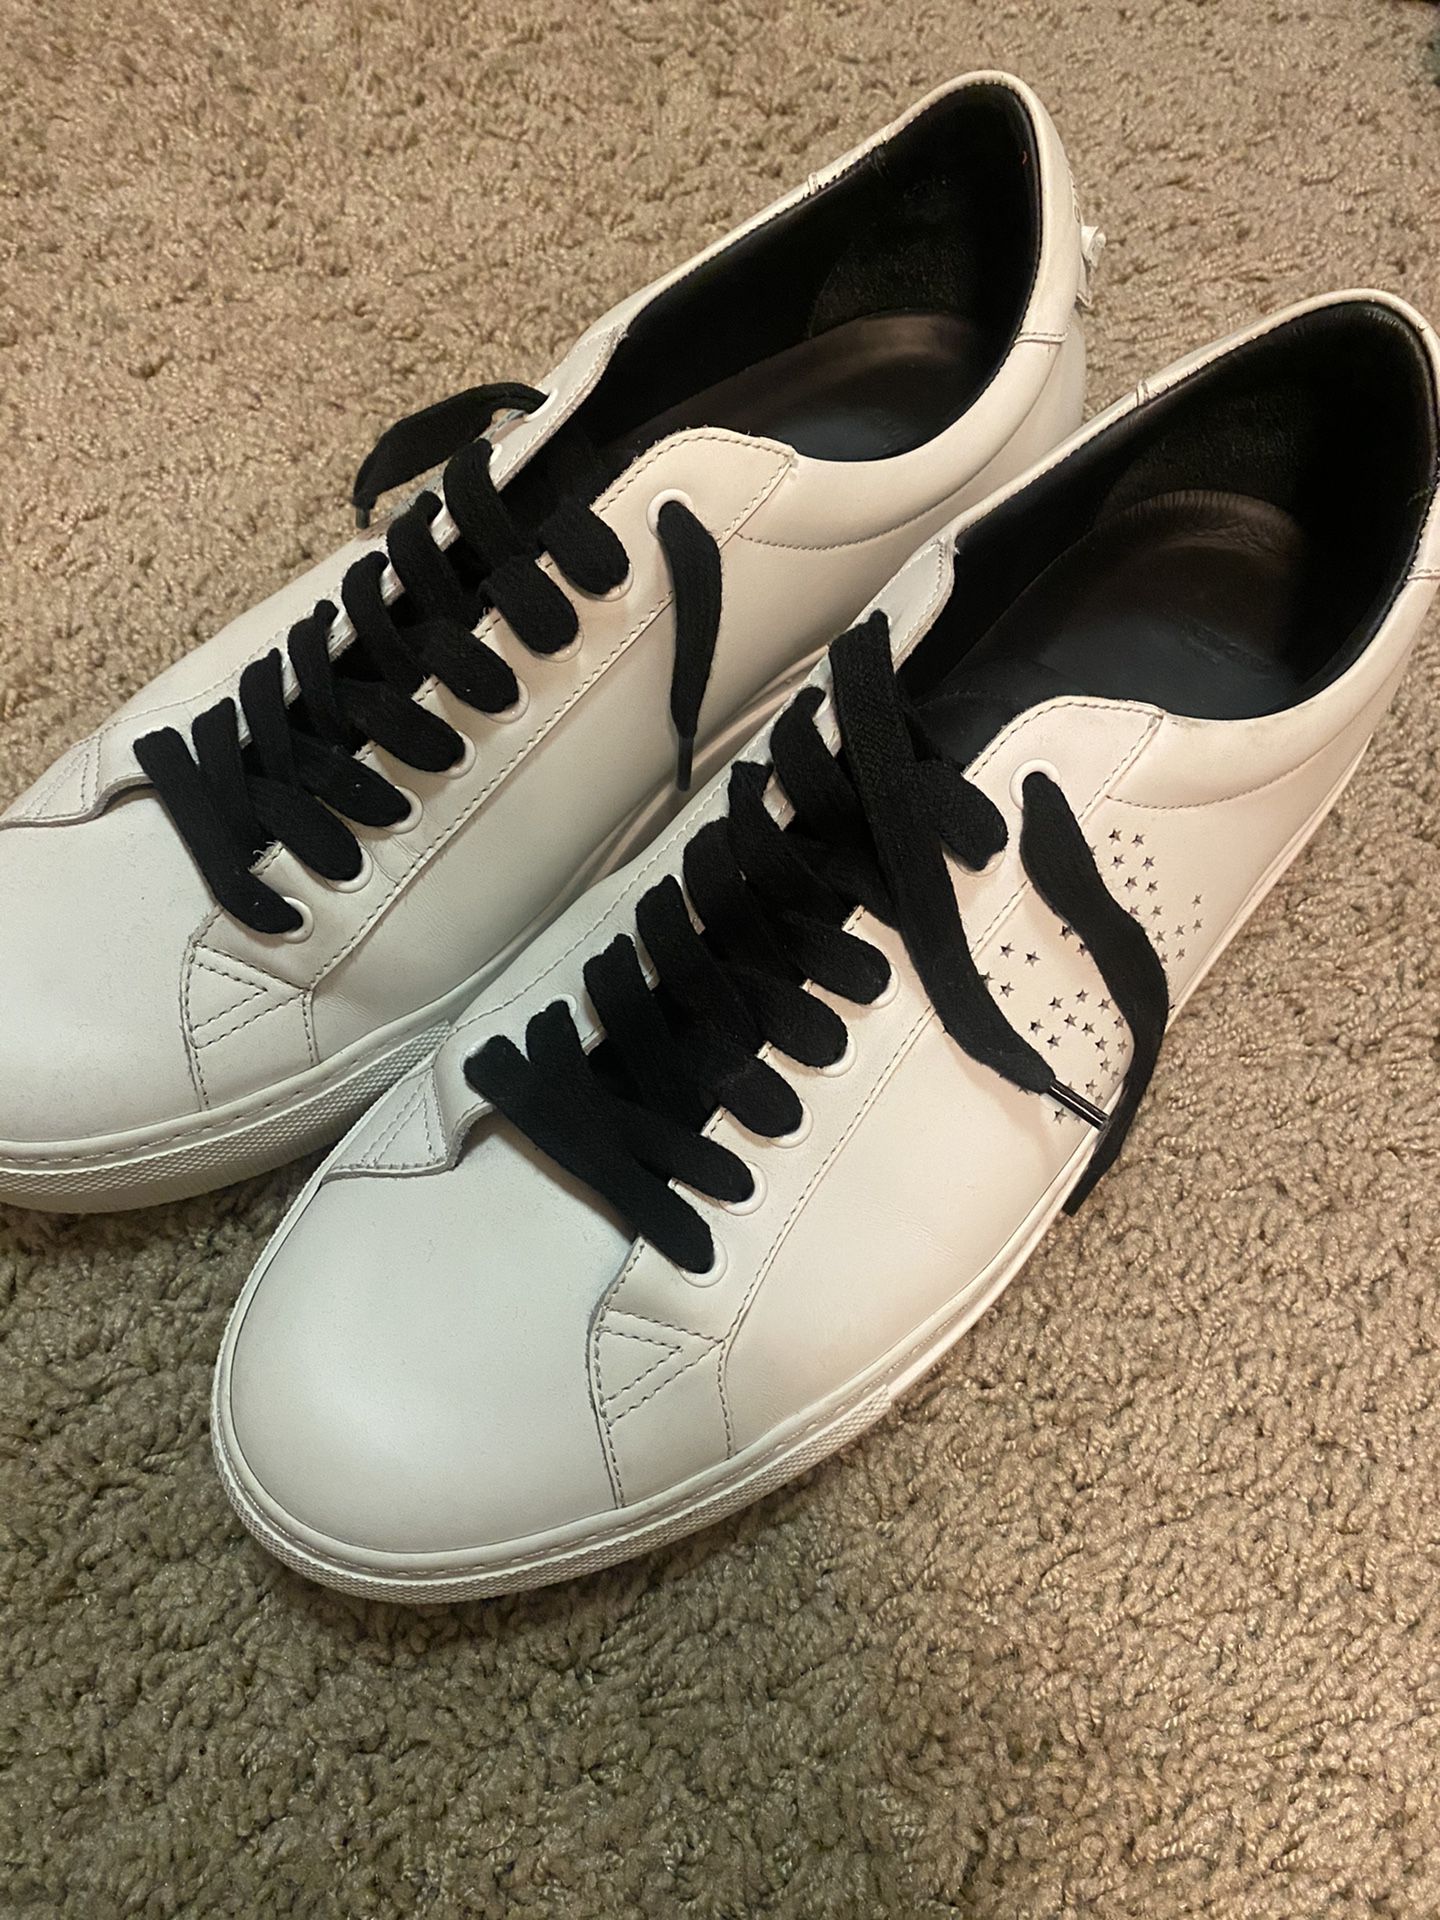 Men's Givenchy Sneakers Size 13 for Sale in Henderson, - OfferUp